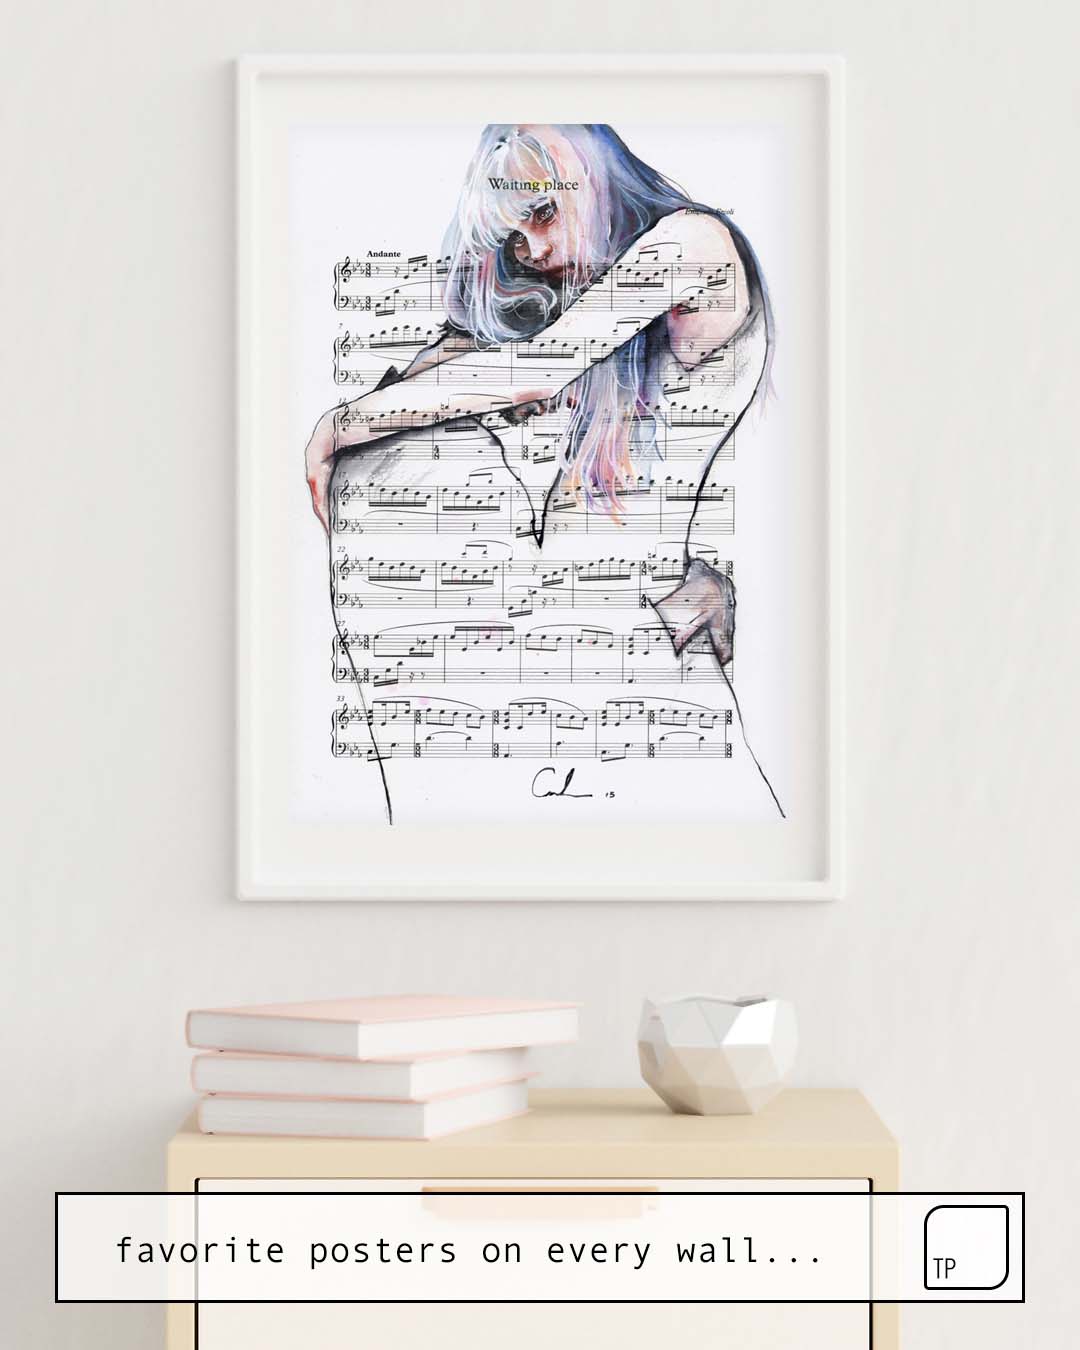 Poster | WAITING PLACE ON SHEET MUSIC by Agnes Cecile